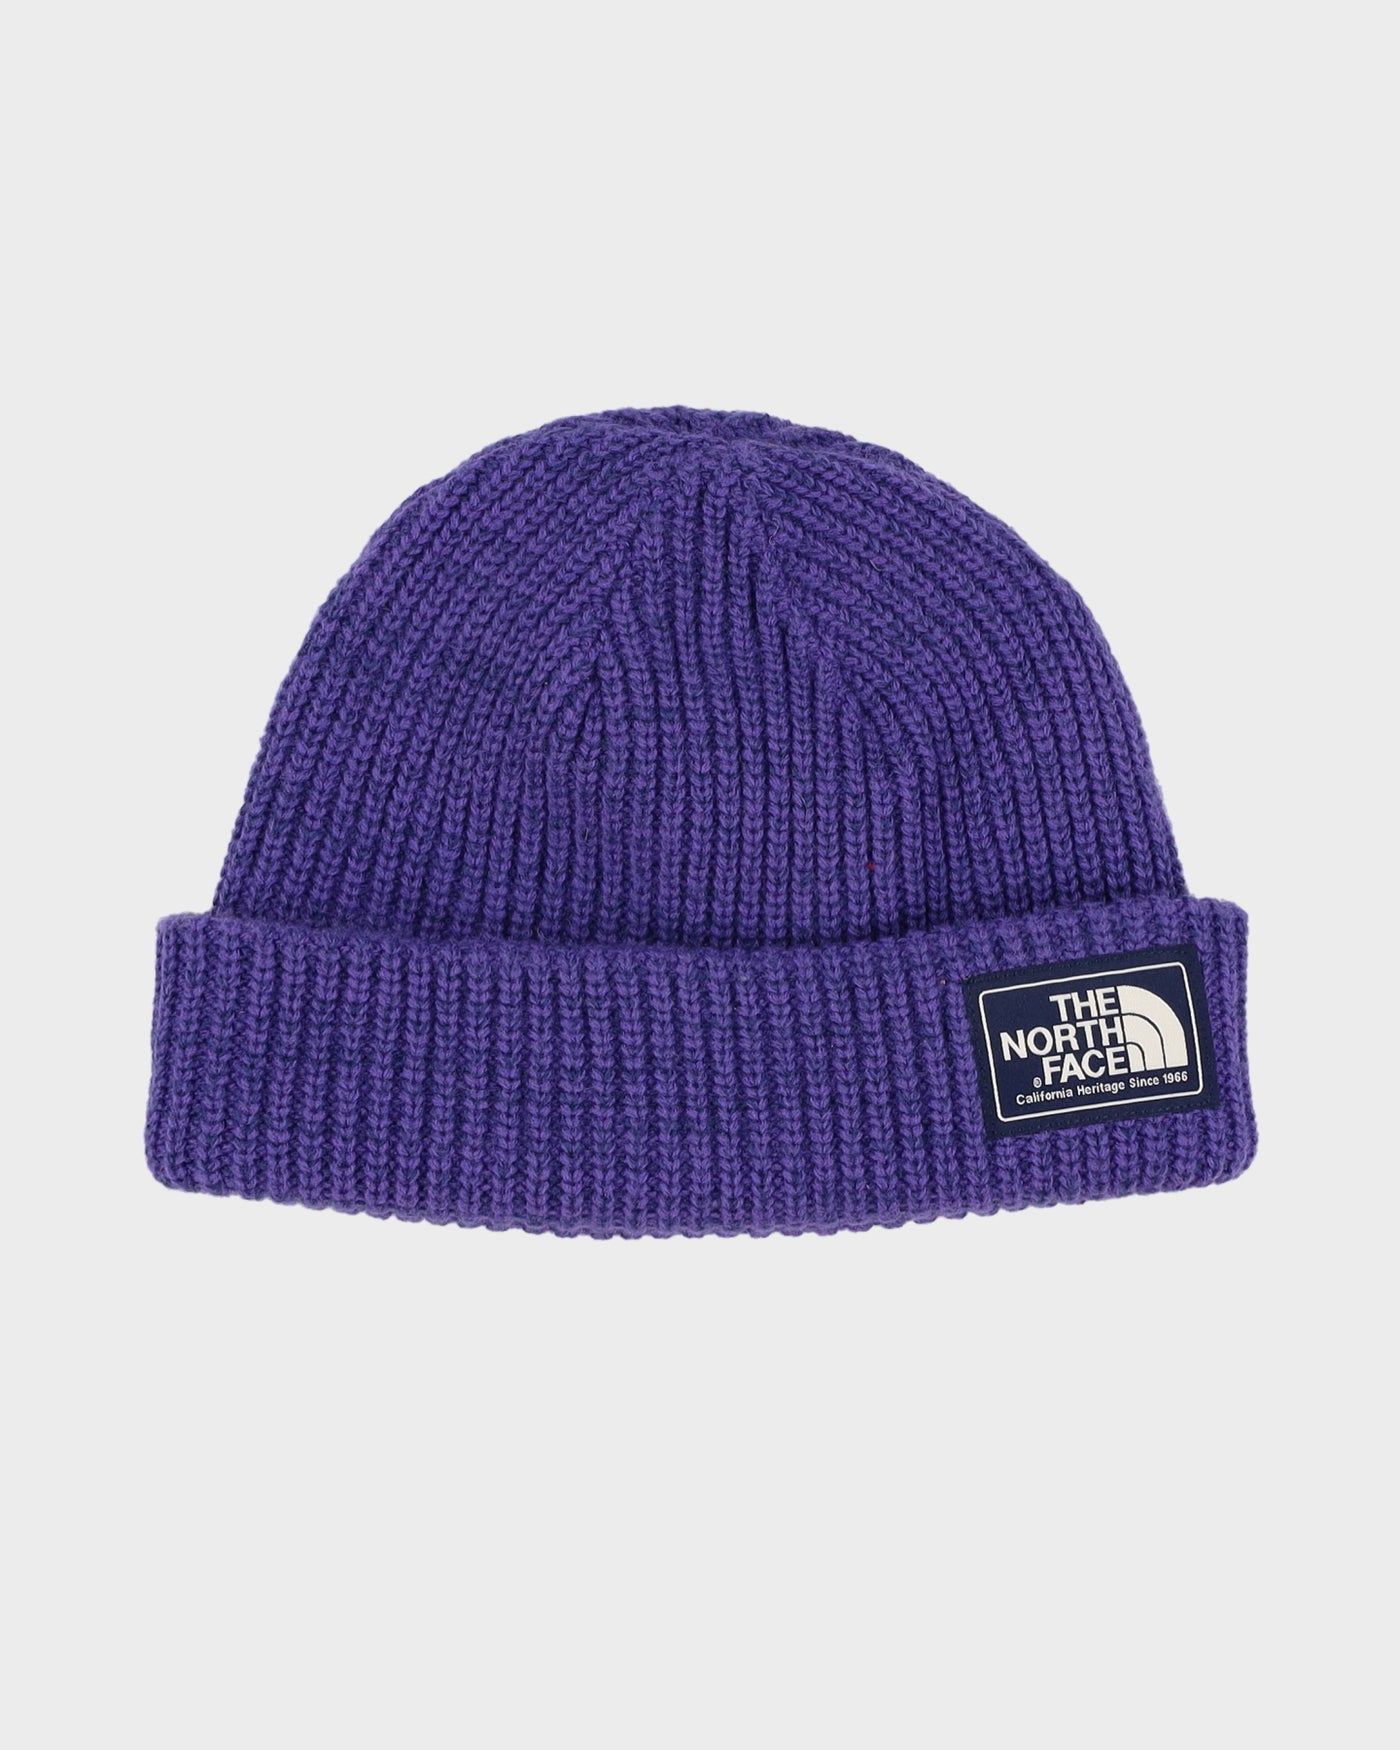 The North Face Purple Thick Beanie